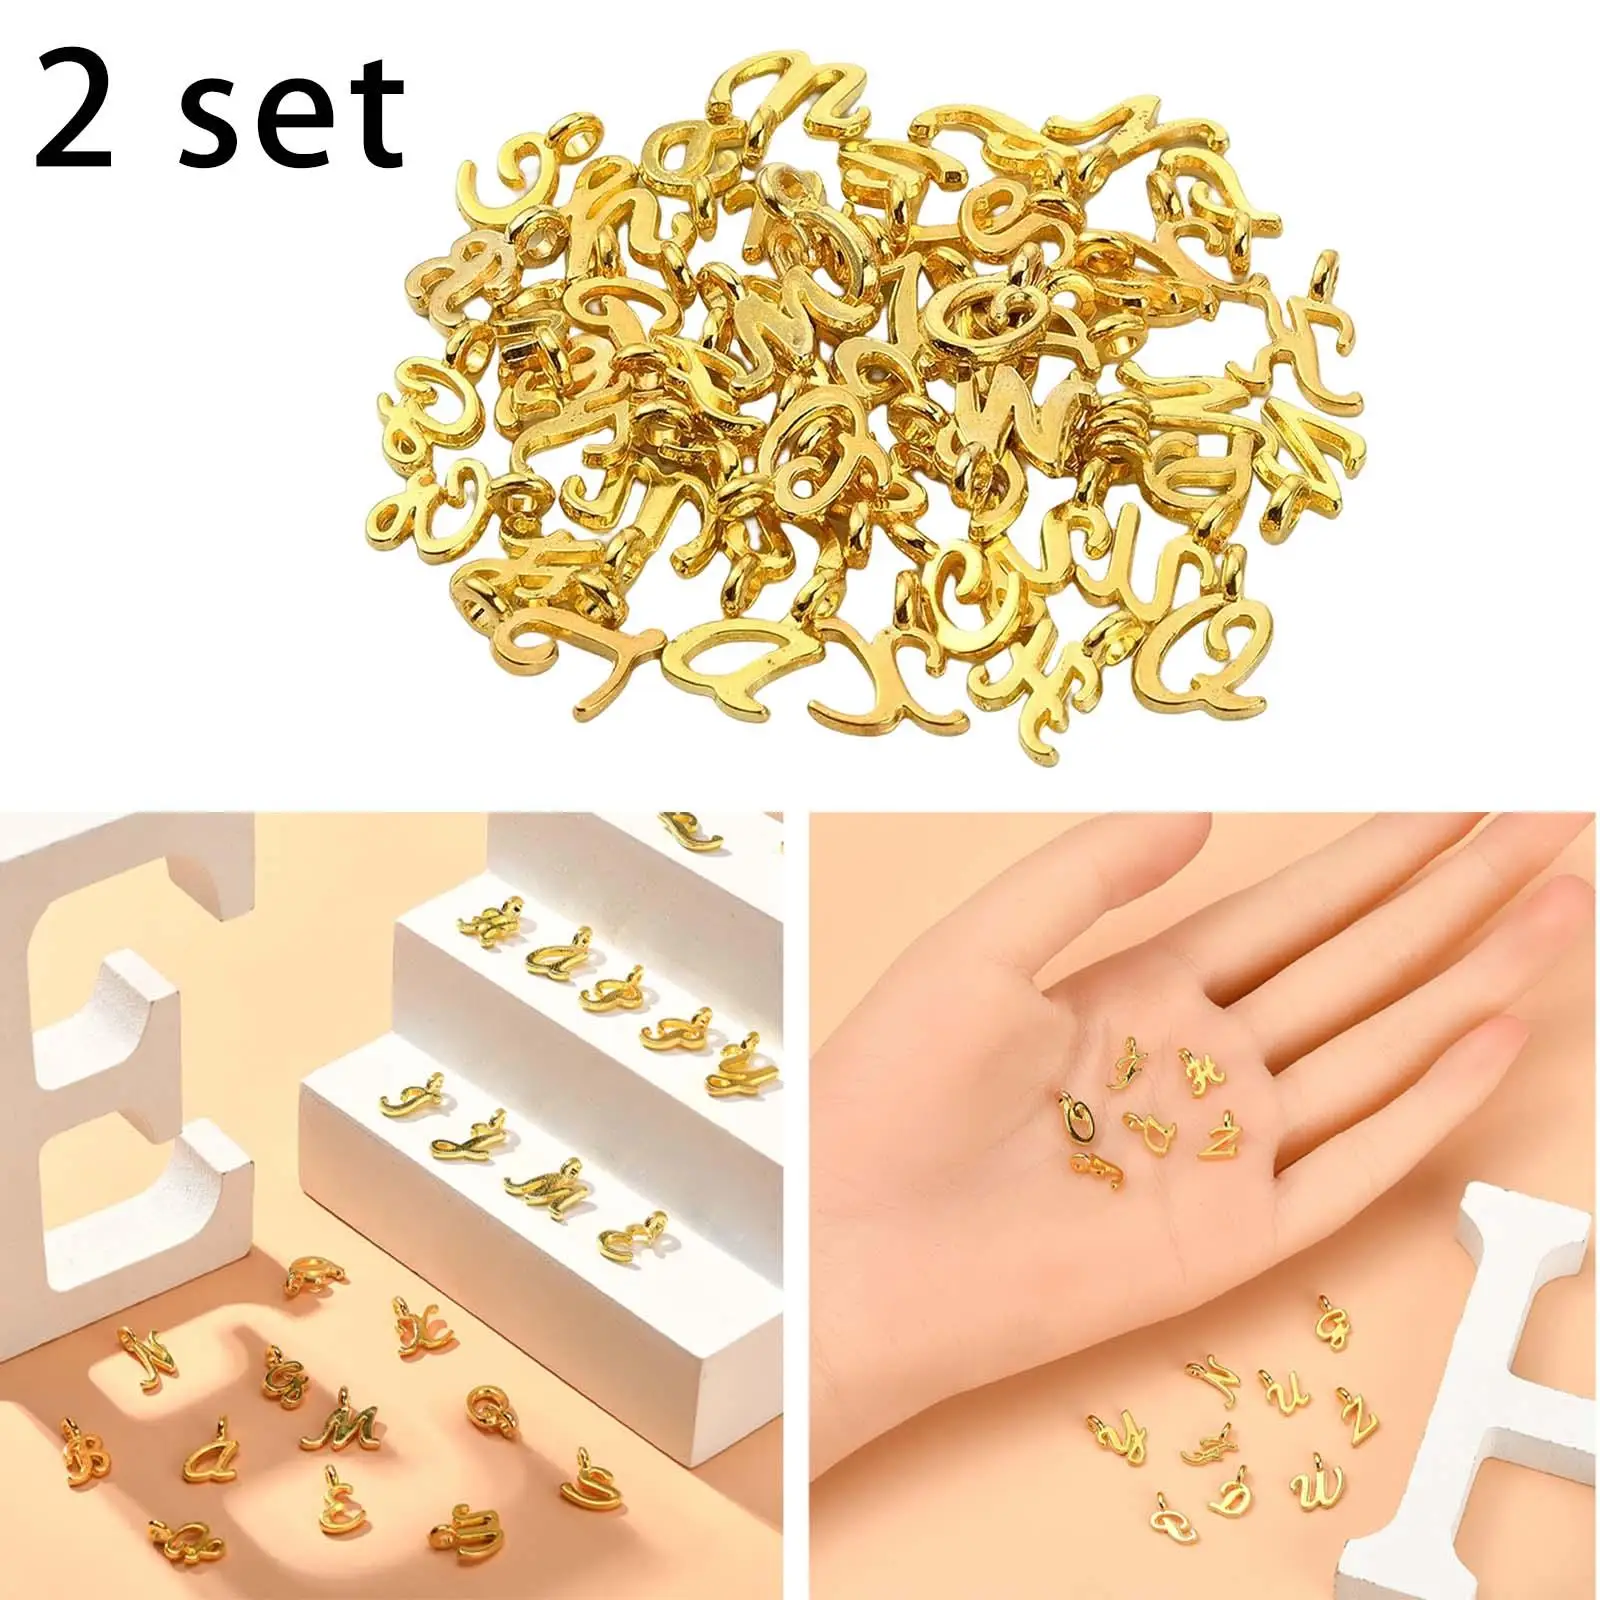 26 Pieces Alphabet Pendant Charms A-Z Letter Charms for Jewelry Making